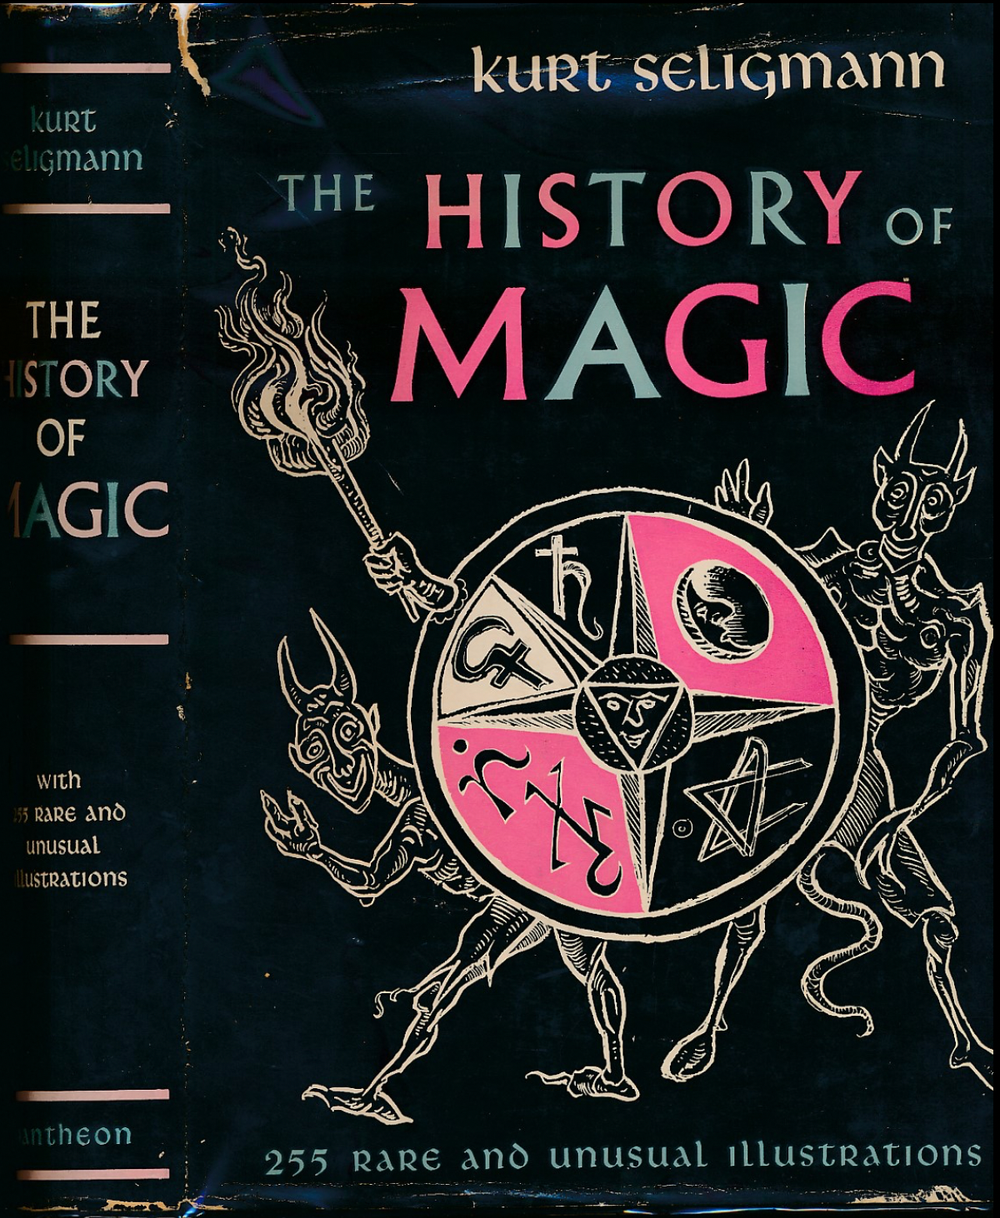 Click on the cover to look through the text of The History of Magic.  X out through the pop up advertisements...